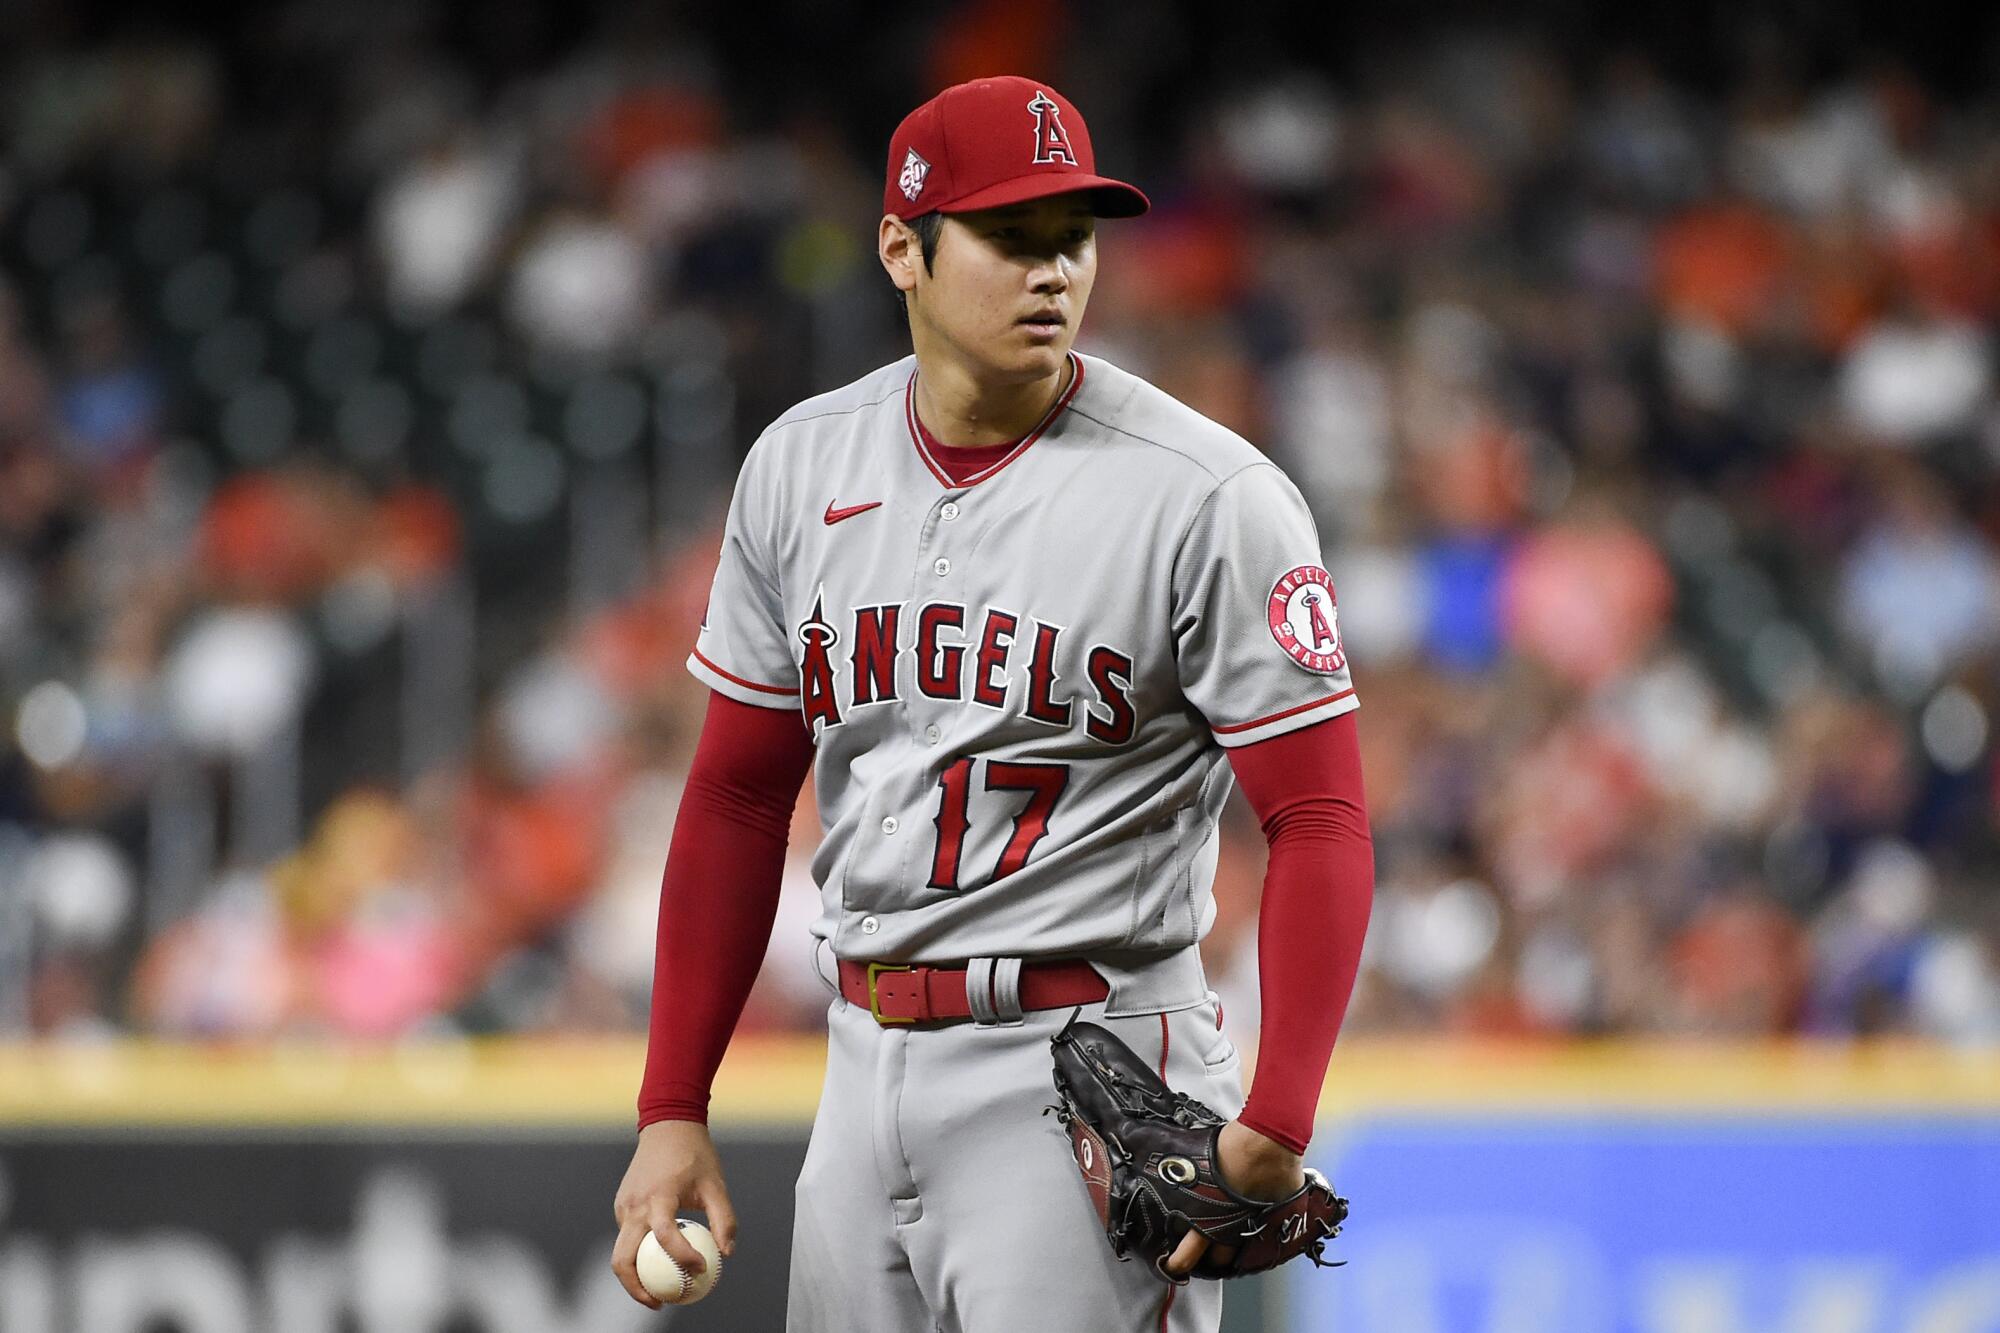 Shohei Ohtani will not pitch on Friday as expected after experiencing arm soreness. (AP Photo/Eric Christian Smith)